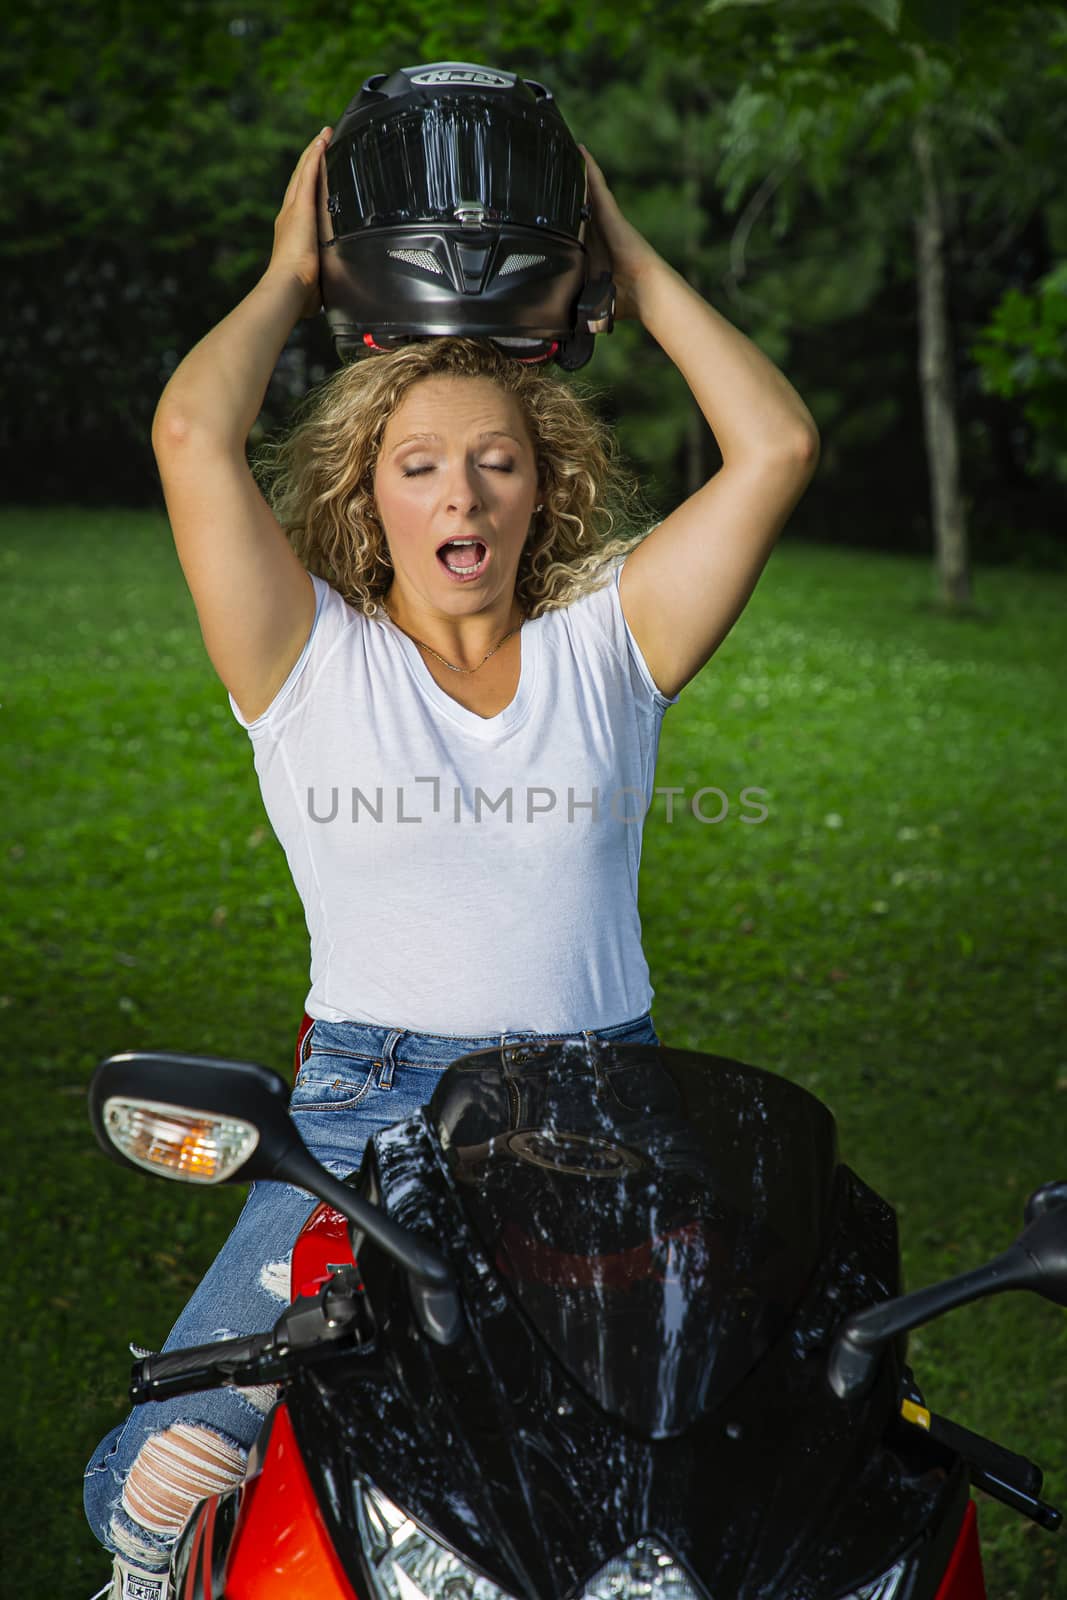 Woman trying to fit a sport motocycle helmet on top of her head